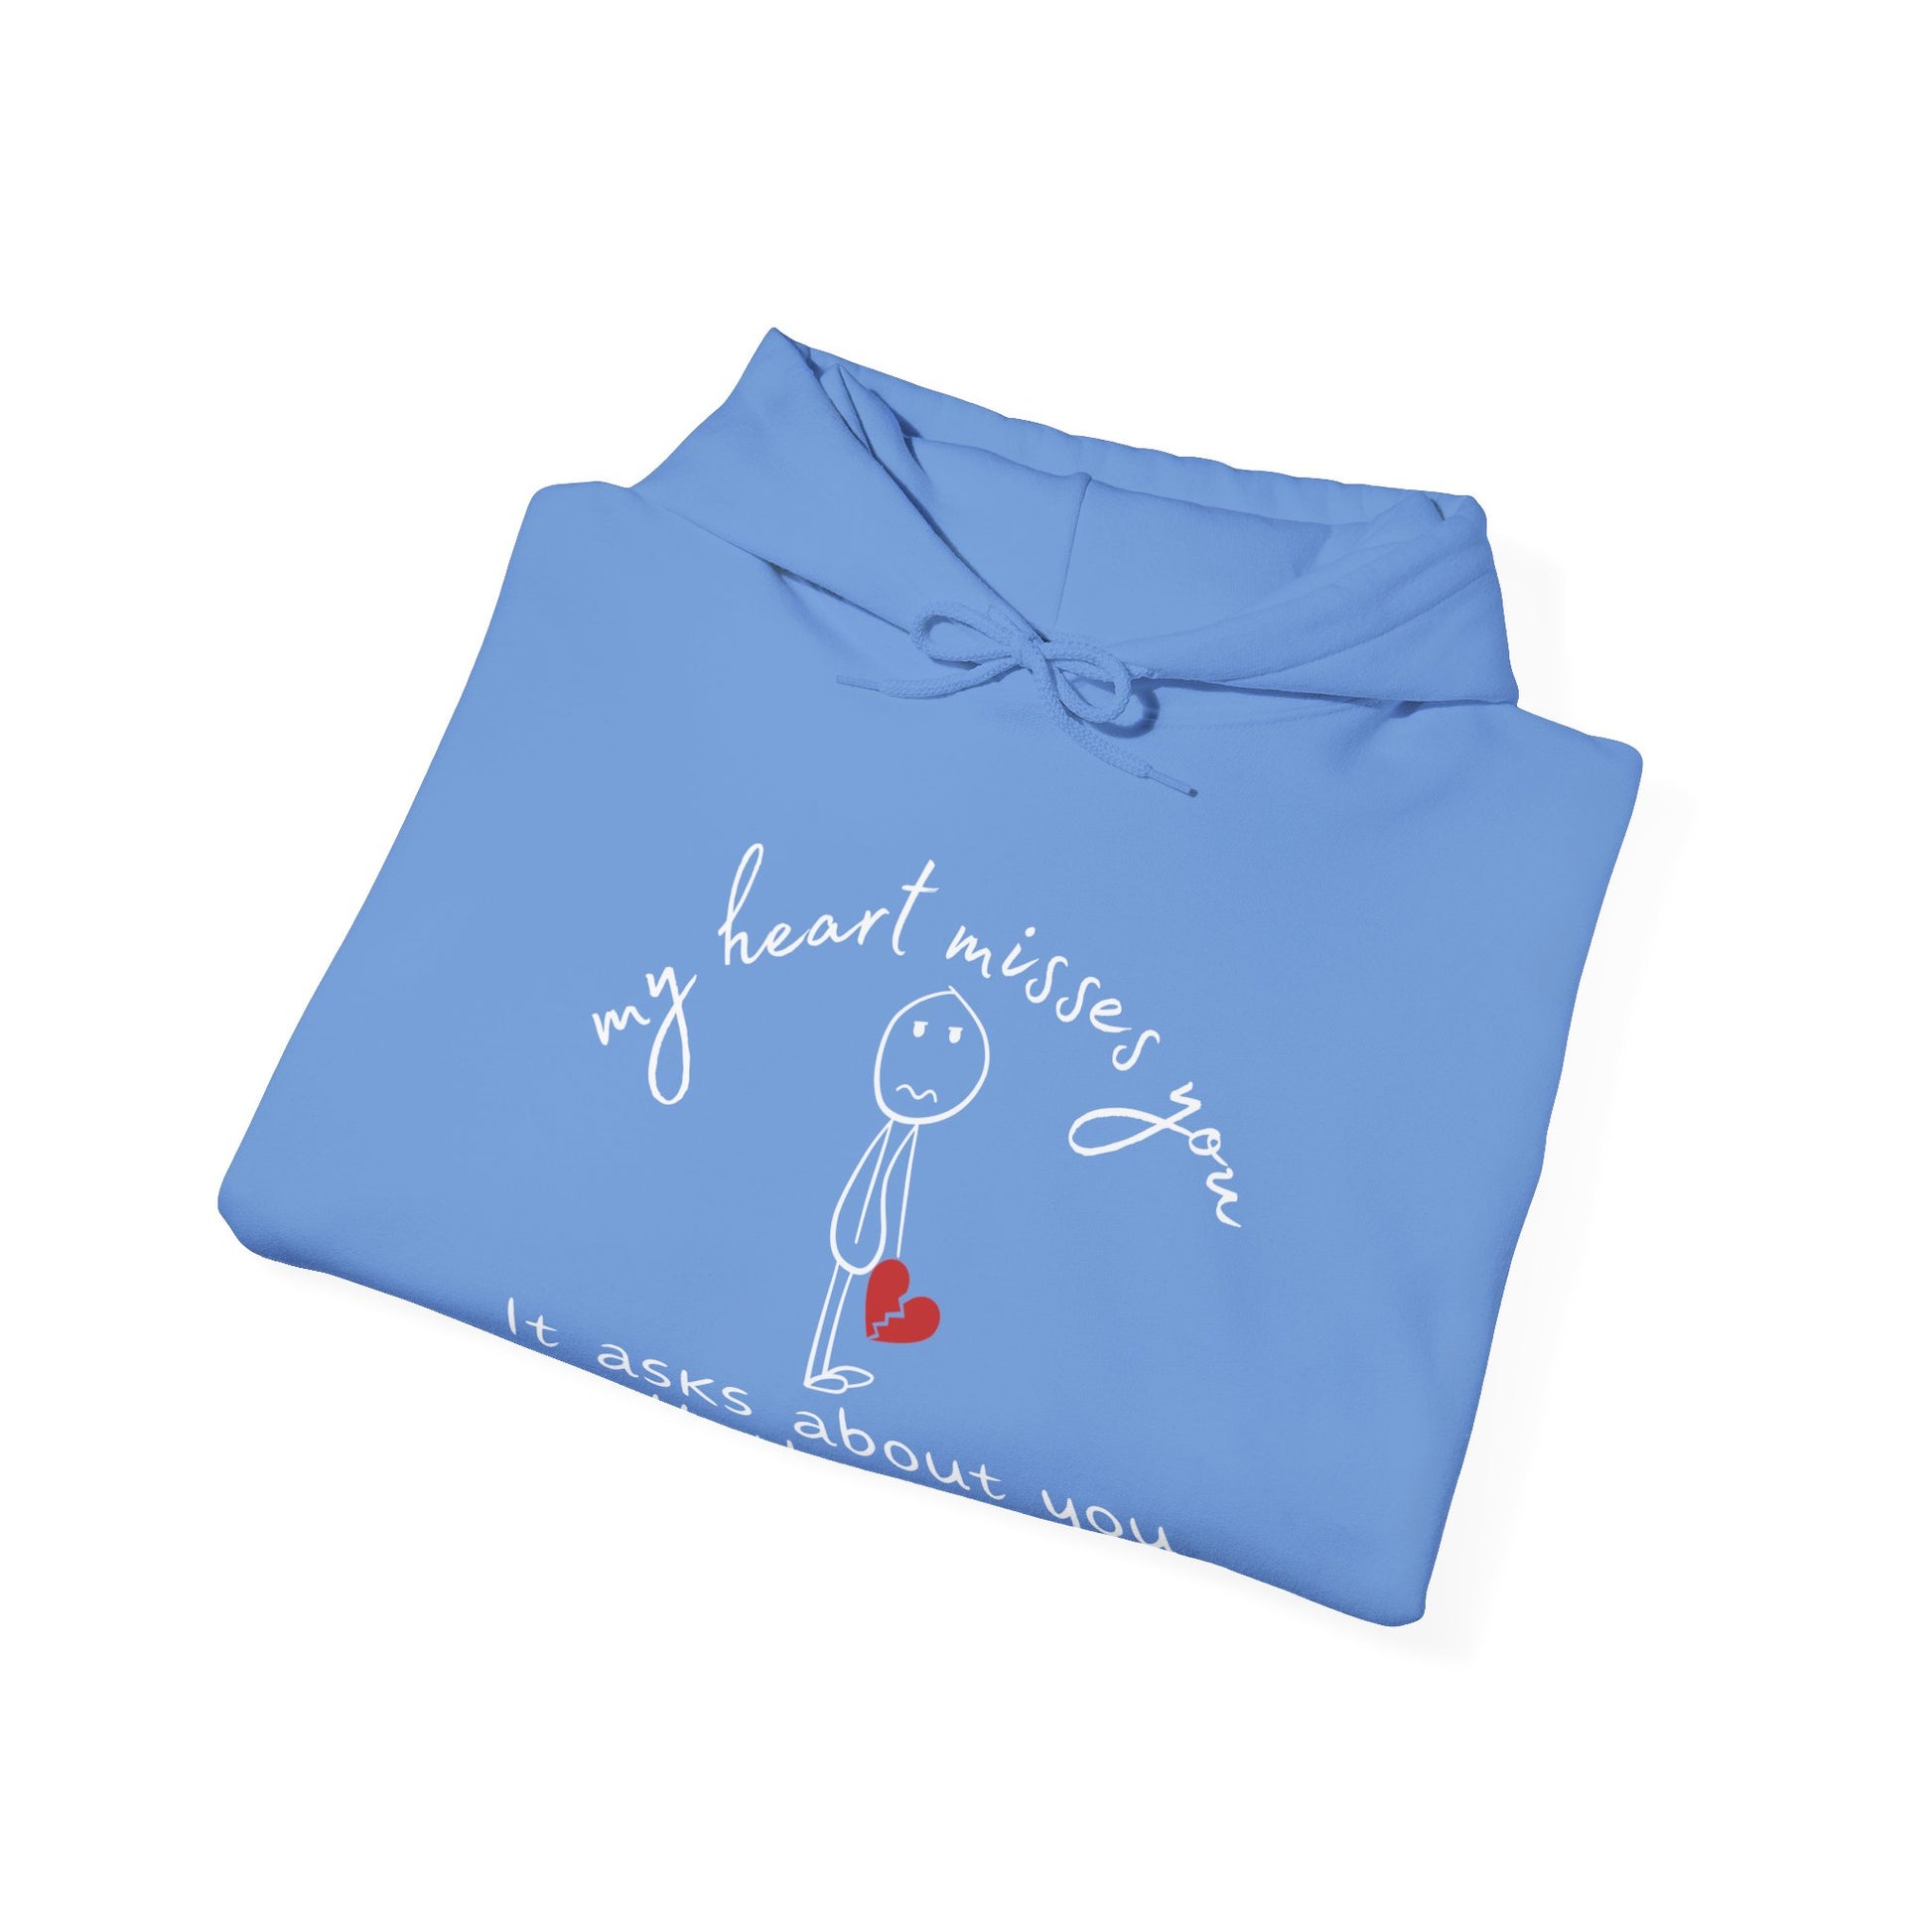 Carolina Blue Gildan 18500 Hoodie sweatshirt. Heartfelt message about missing someone and your pain during a time of grieving.